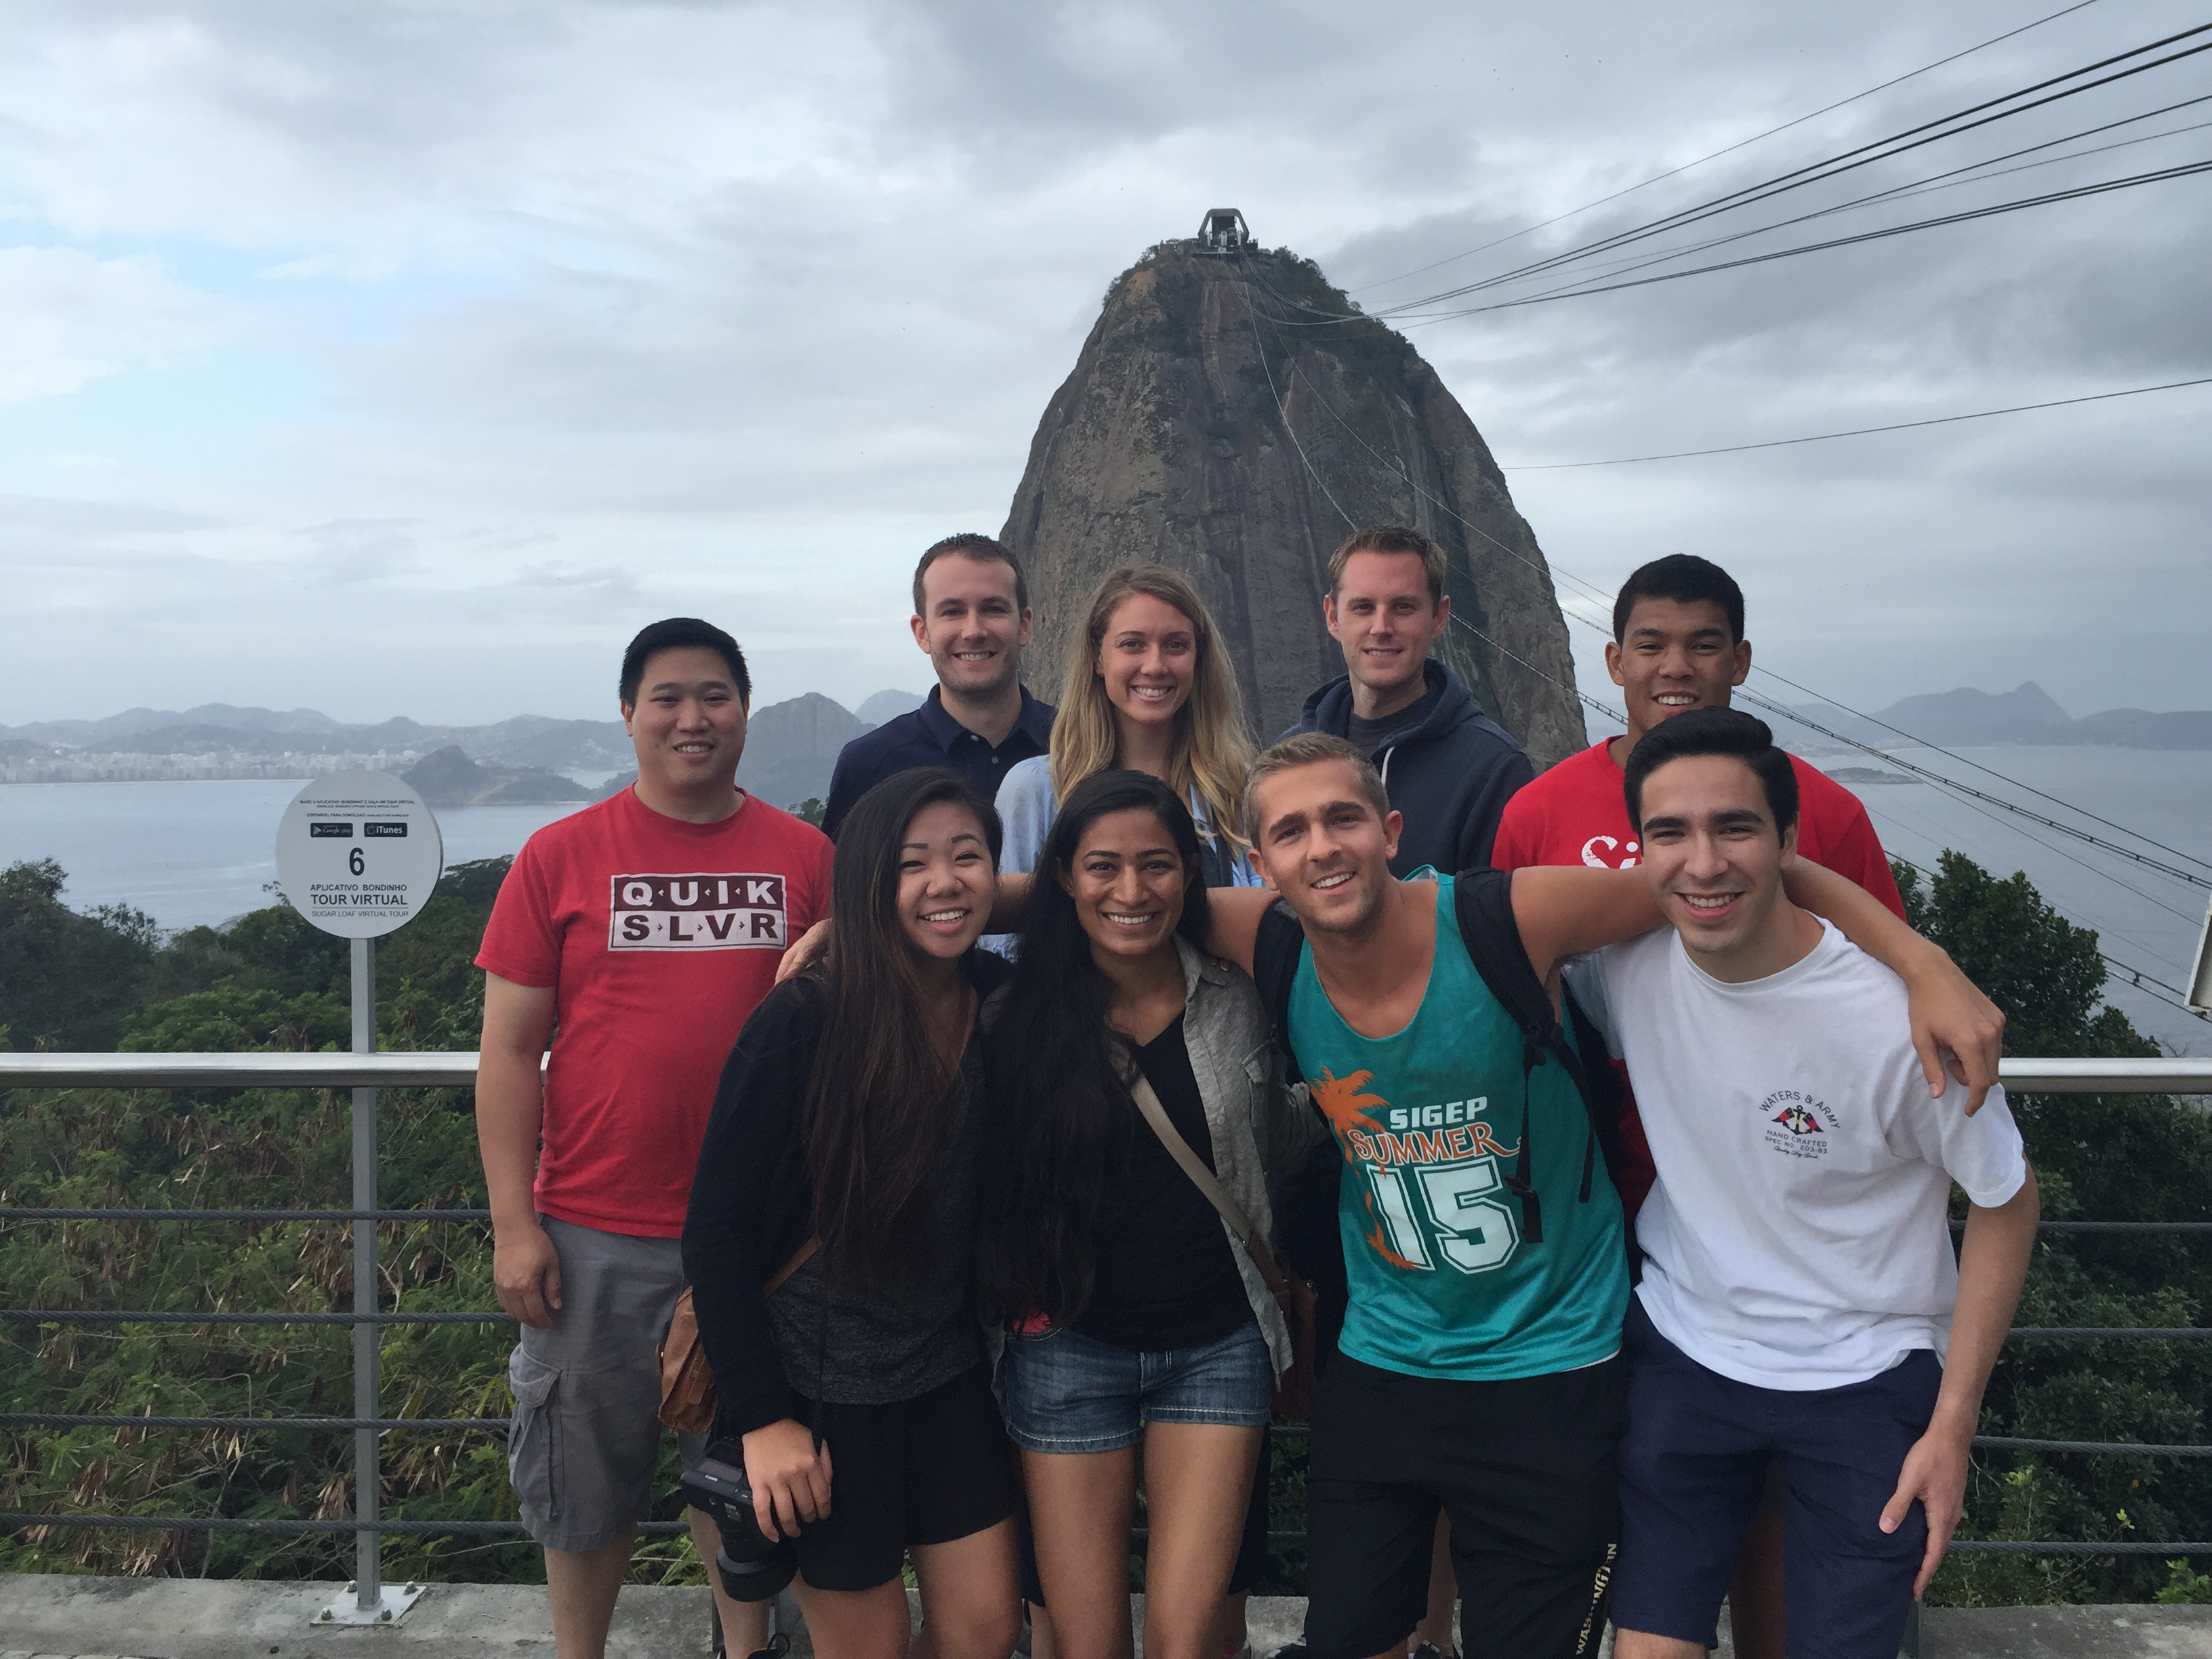 The group spent the day sightseeing Rio and visited the famous Sugar Loaf Mountain.